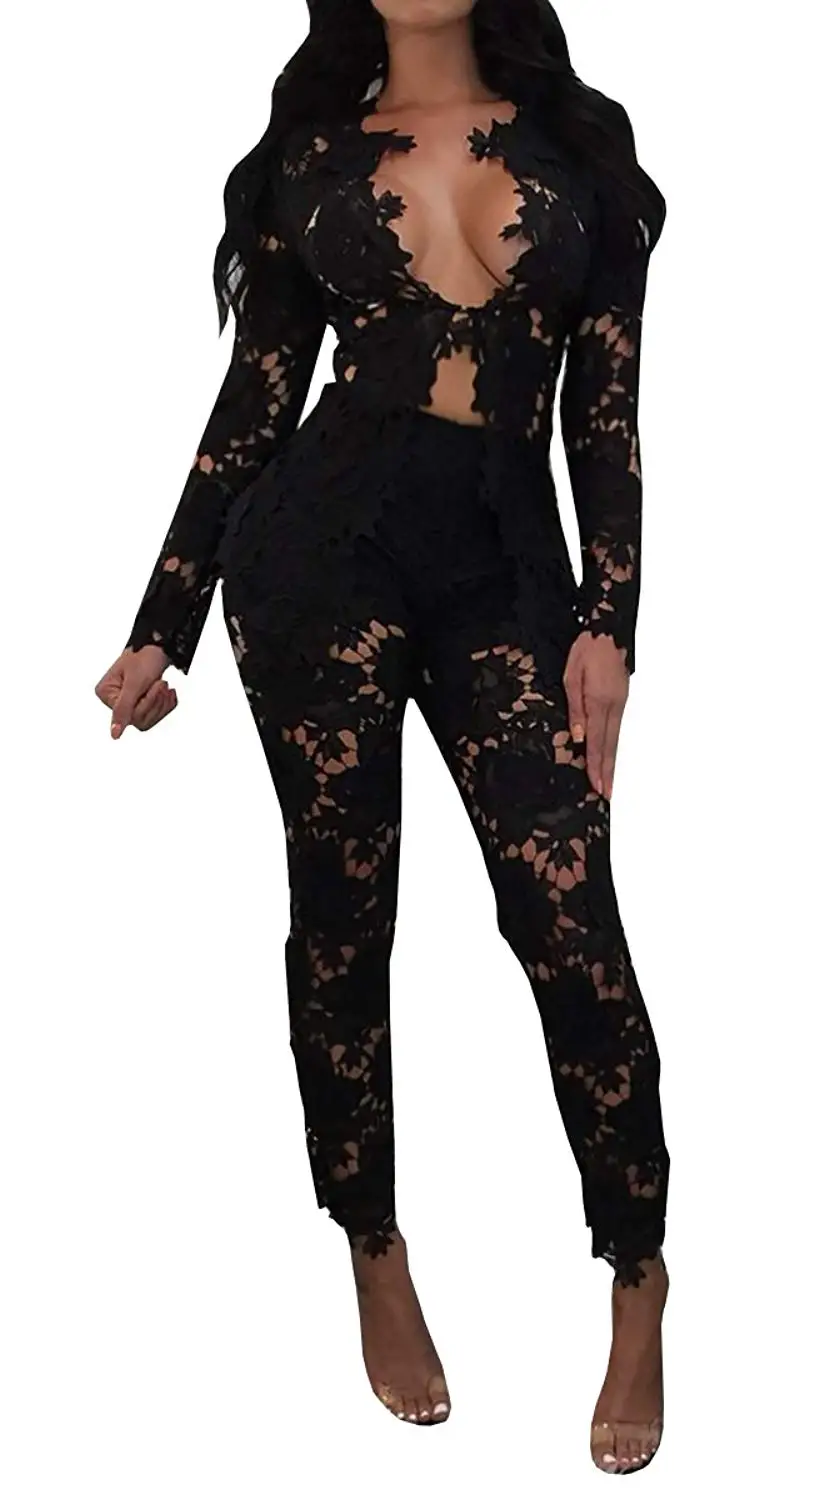 Cheap Sexy Pantsuits, find Sexy Pantsuits deals on line at Alibaba.com